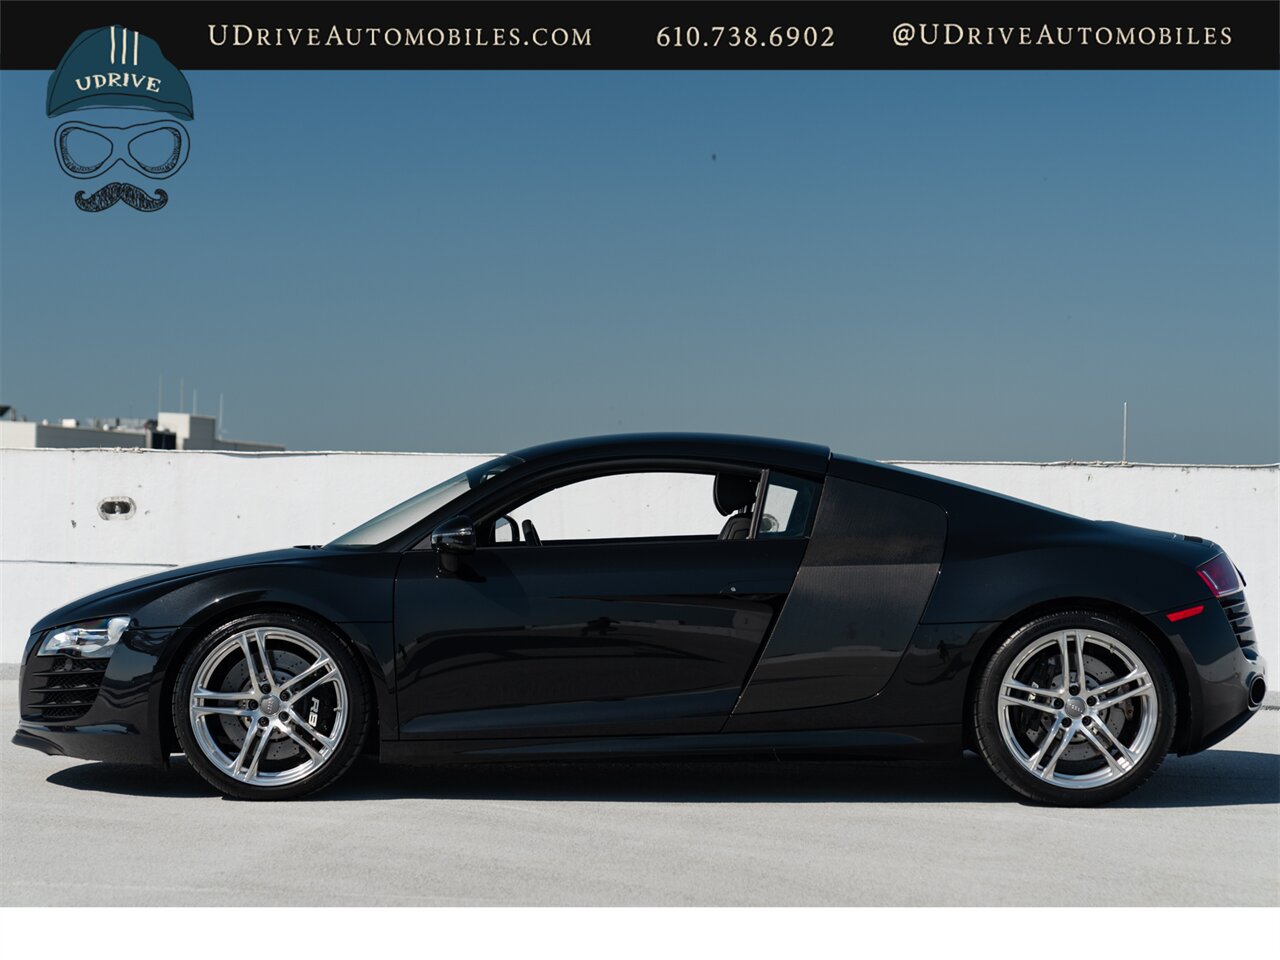 2009 Audi R8 Quattro  4.2L V8 6 Speed Manual - Photo 9 - West Chester, PA 19382